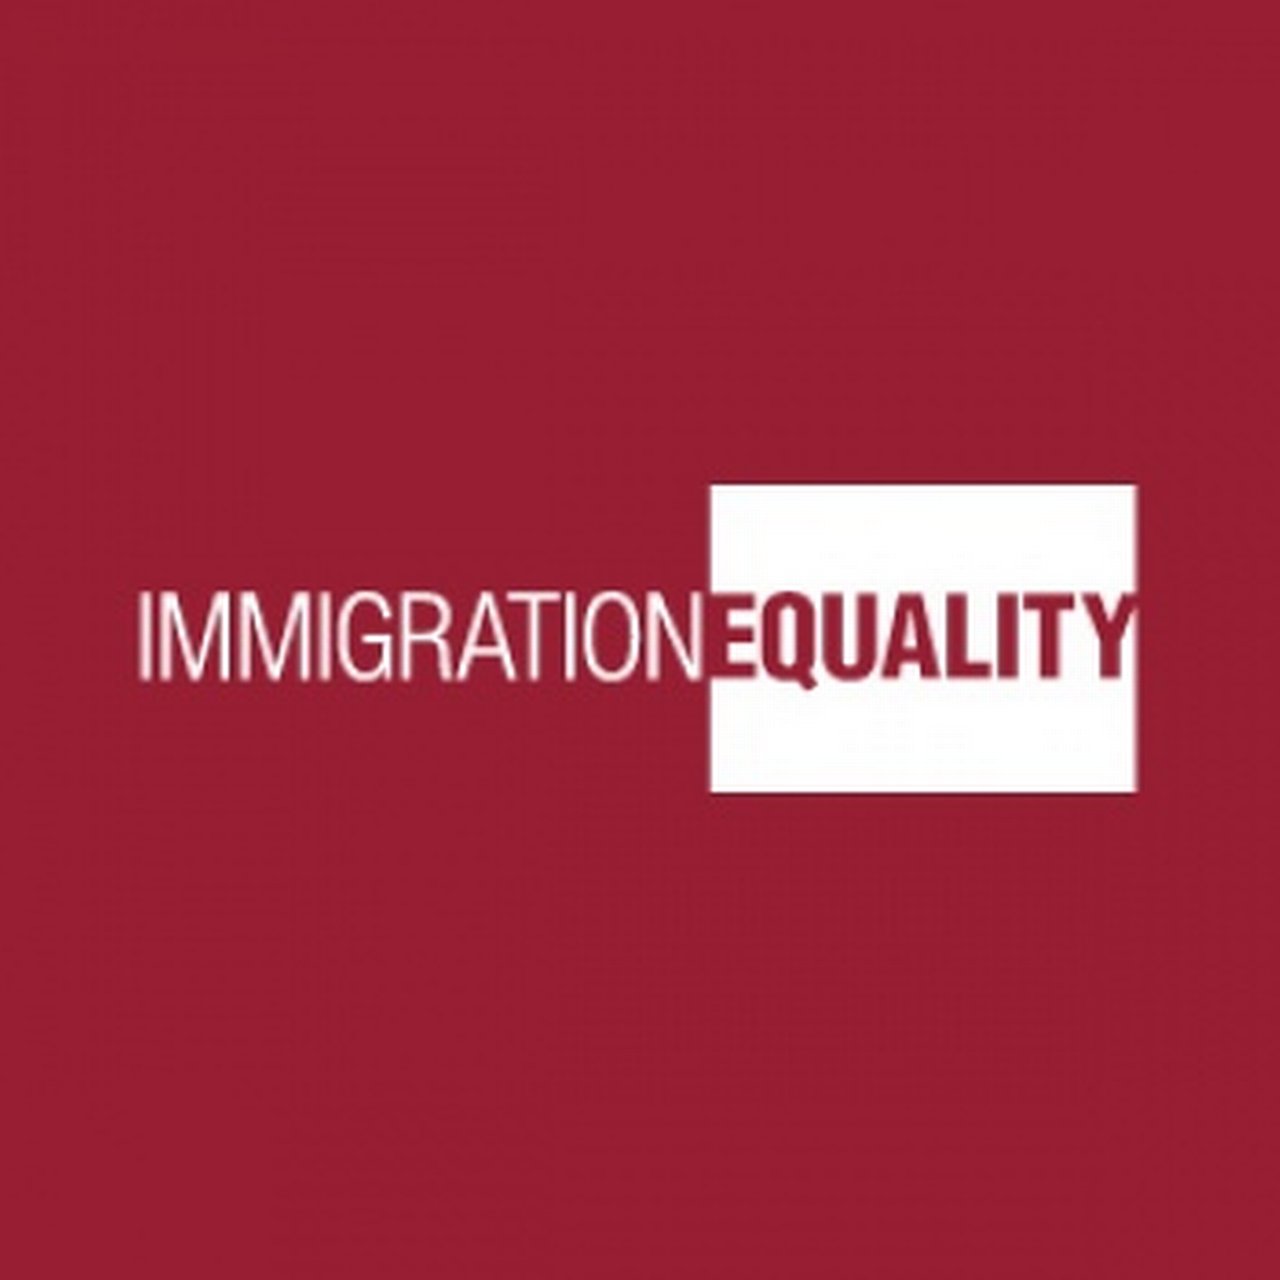 Immigration equality